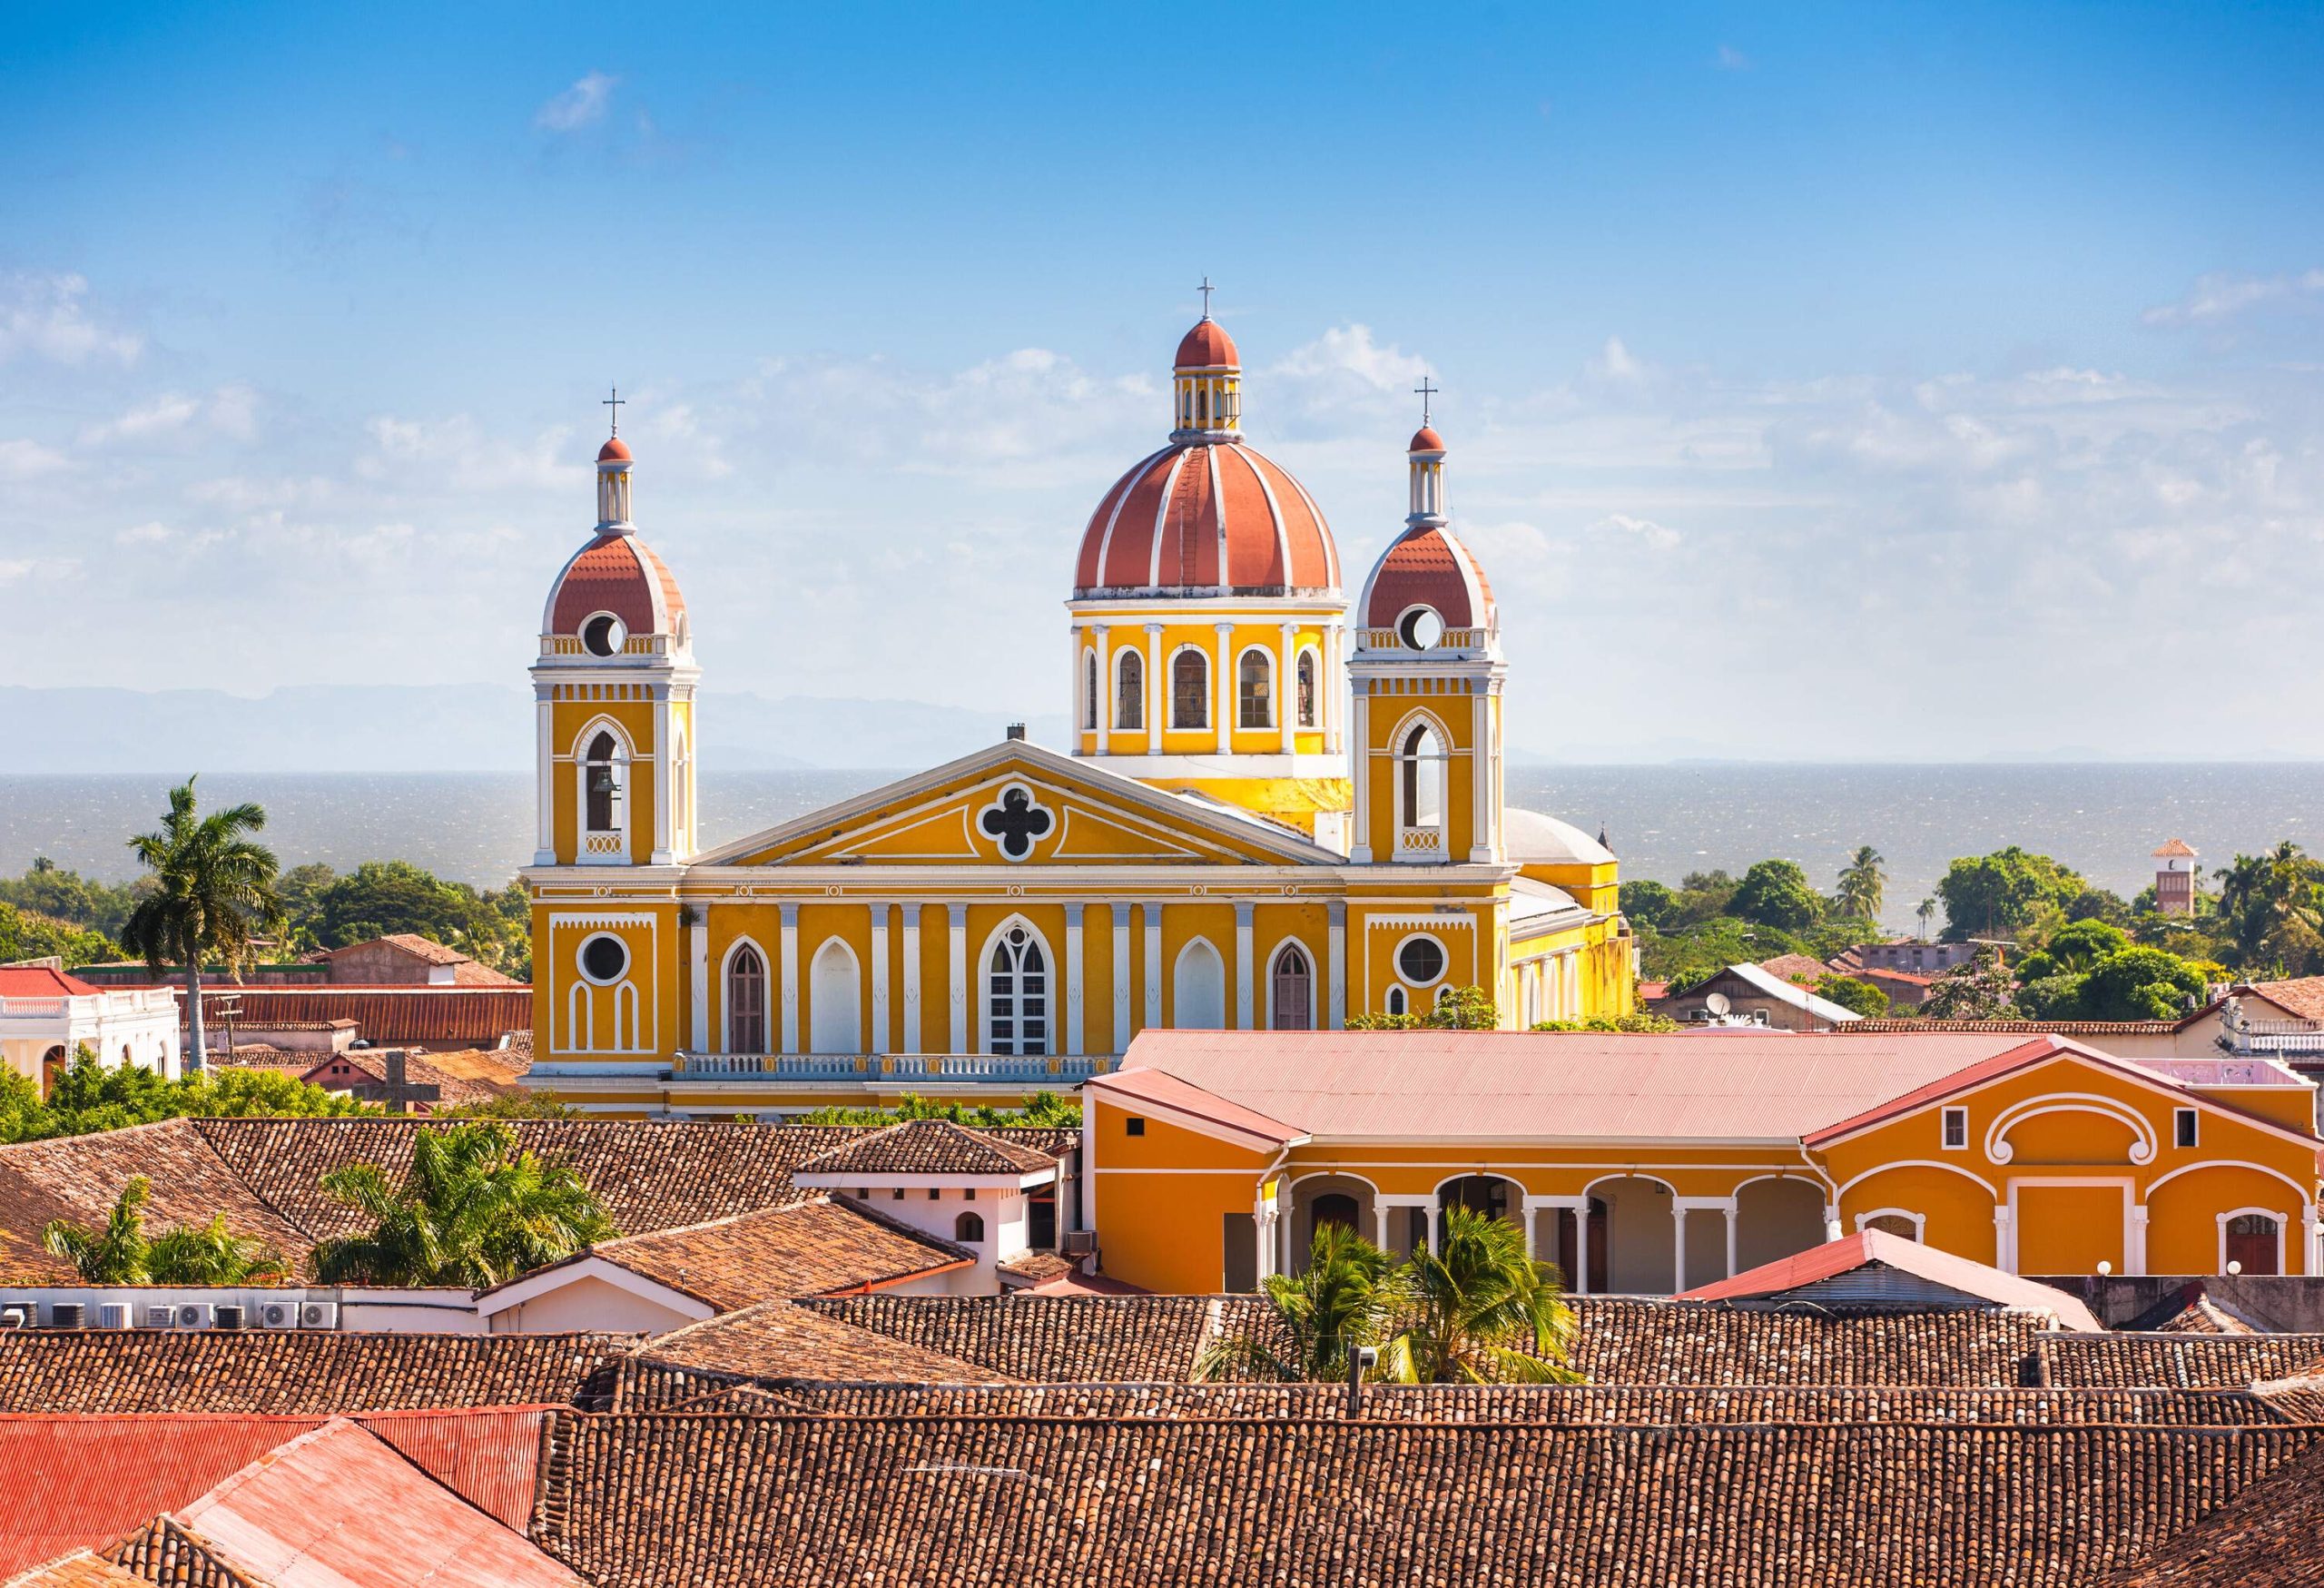 dest_nicaragua_granada_cathedral-of-granada-gettyimages-155350183_universal_within-usage-period_34436